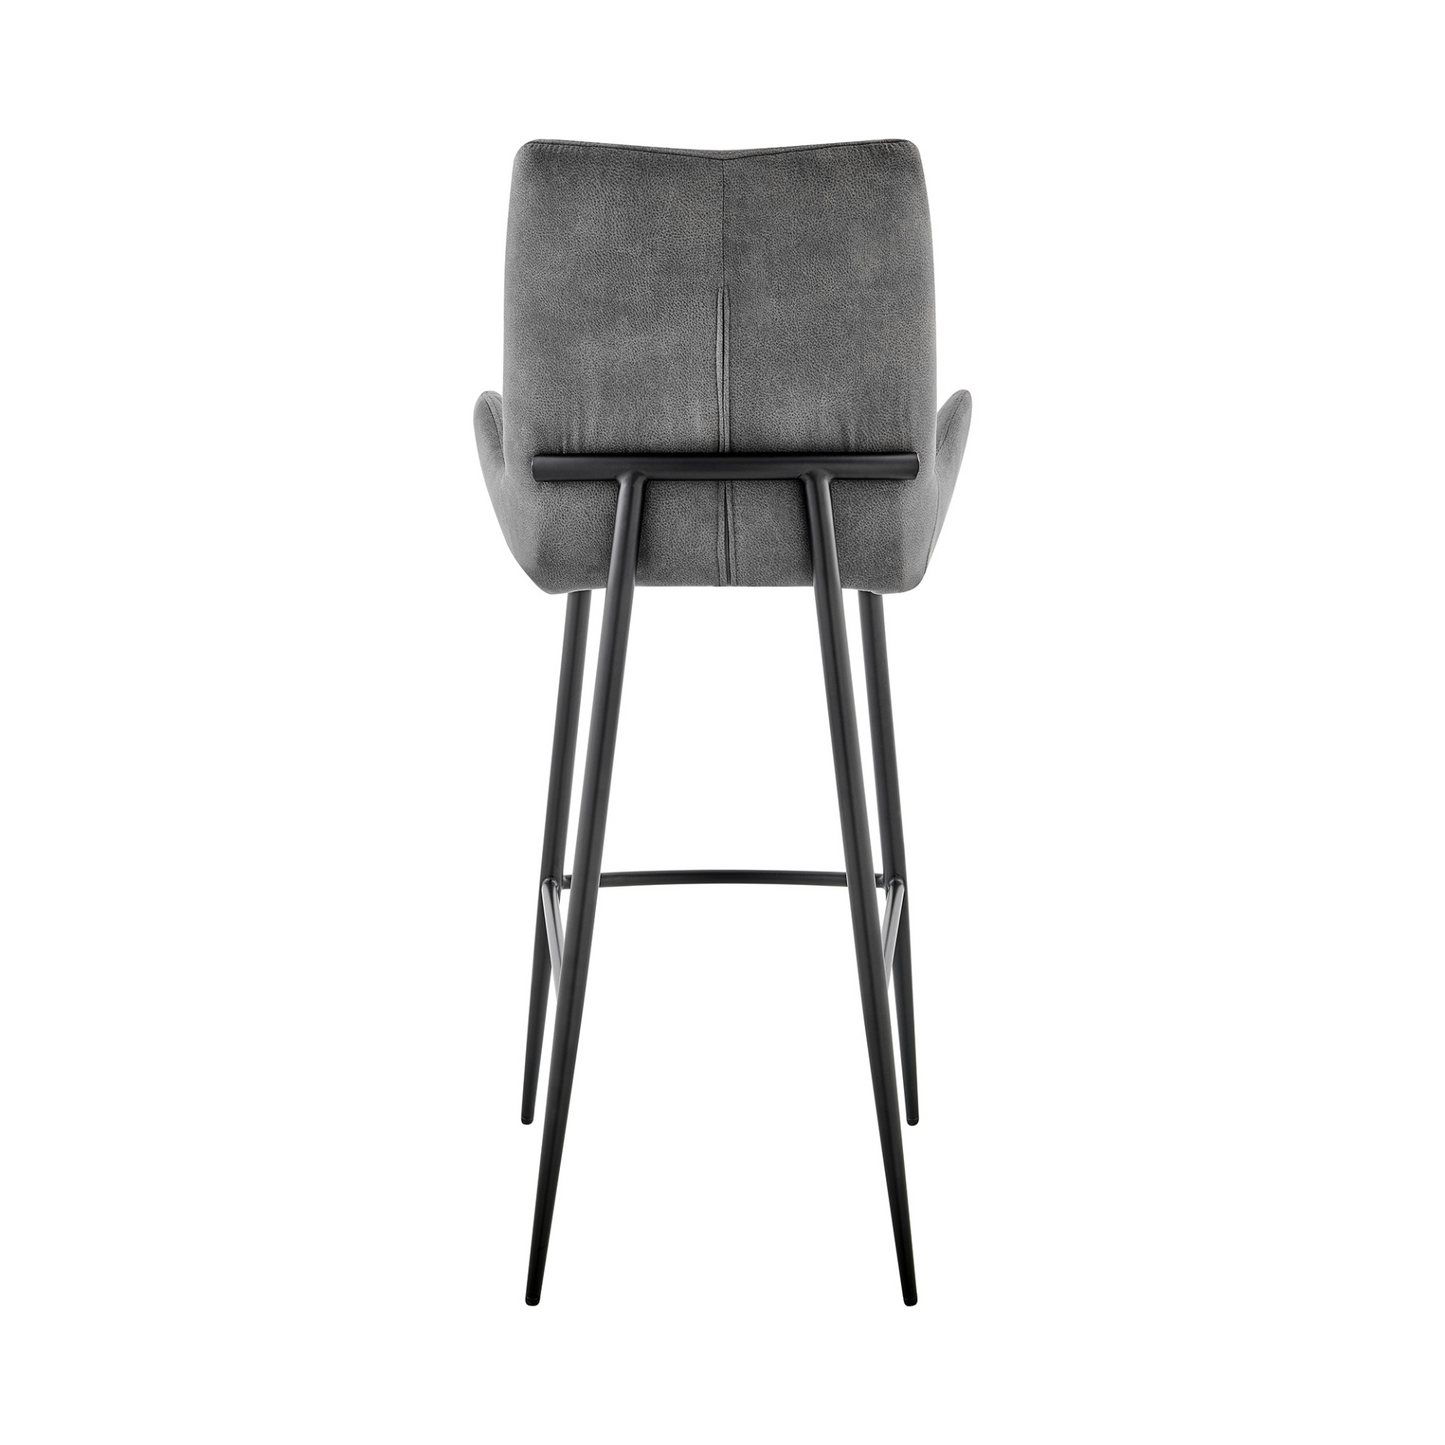 Charcoal Microfiber + Black Iron Counter Height Chair - Higher Gallery